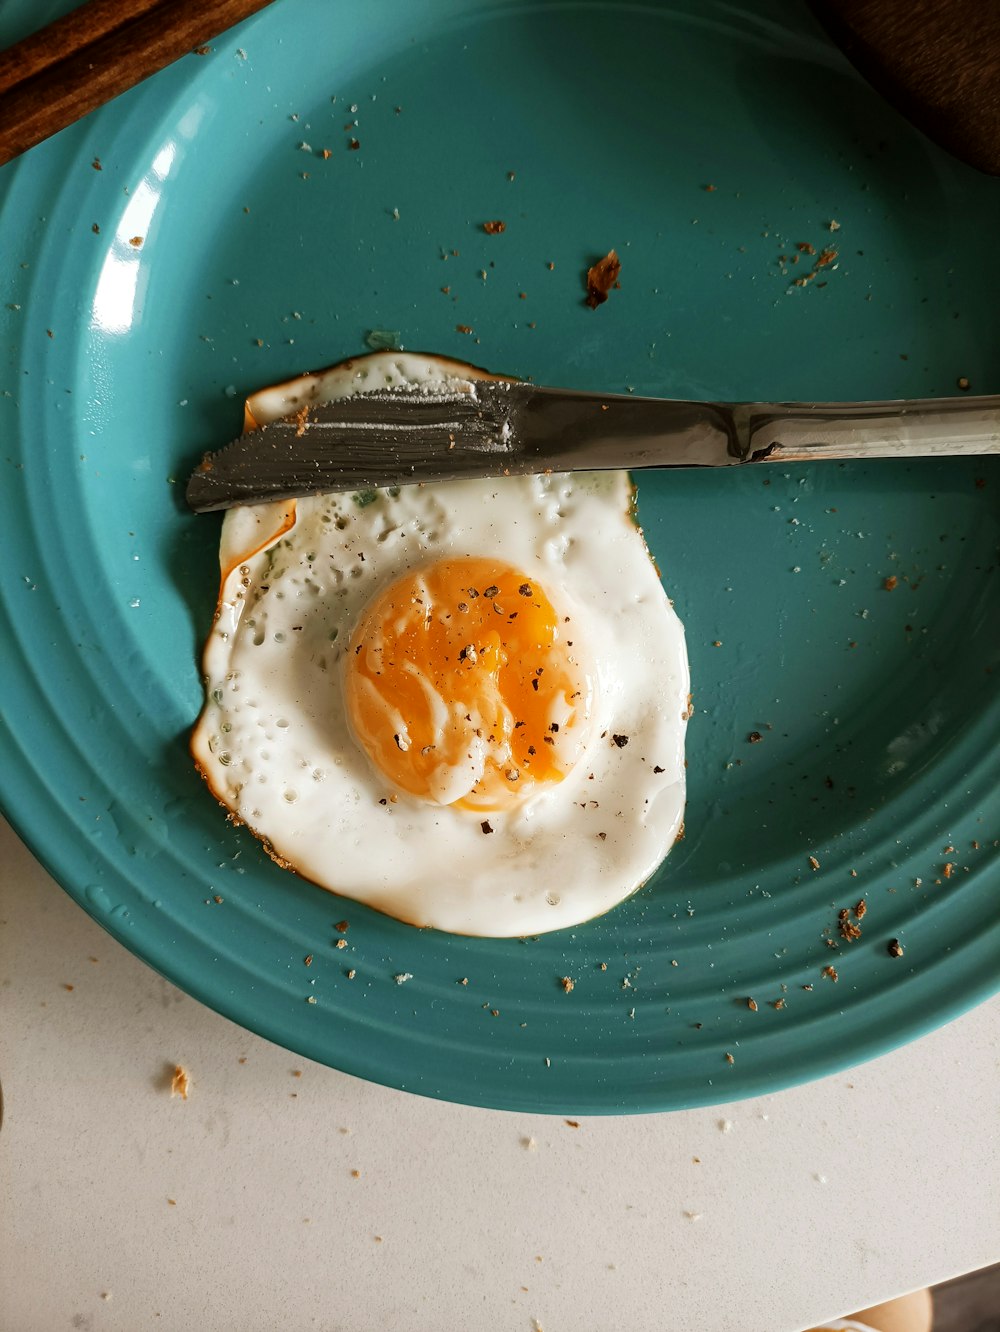 a fried egg on a plate with a knife and fork